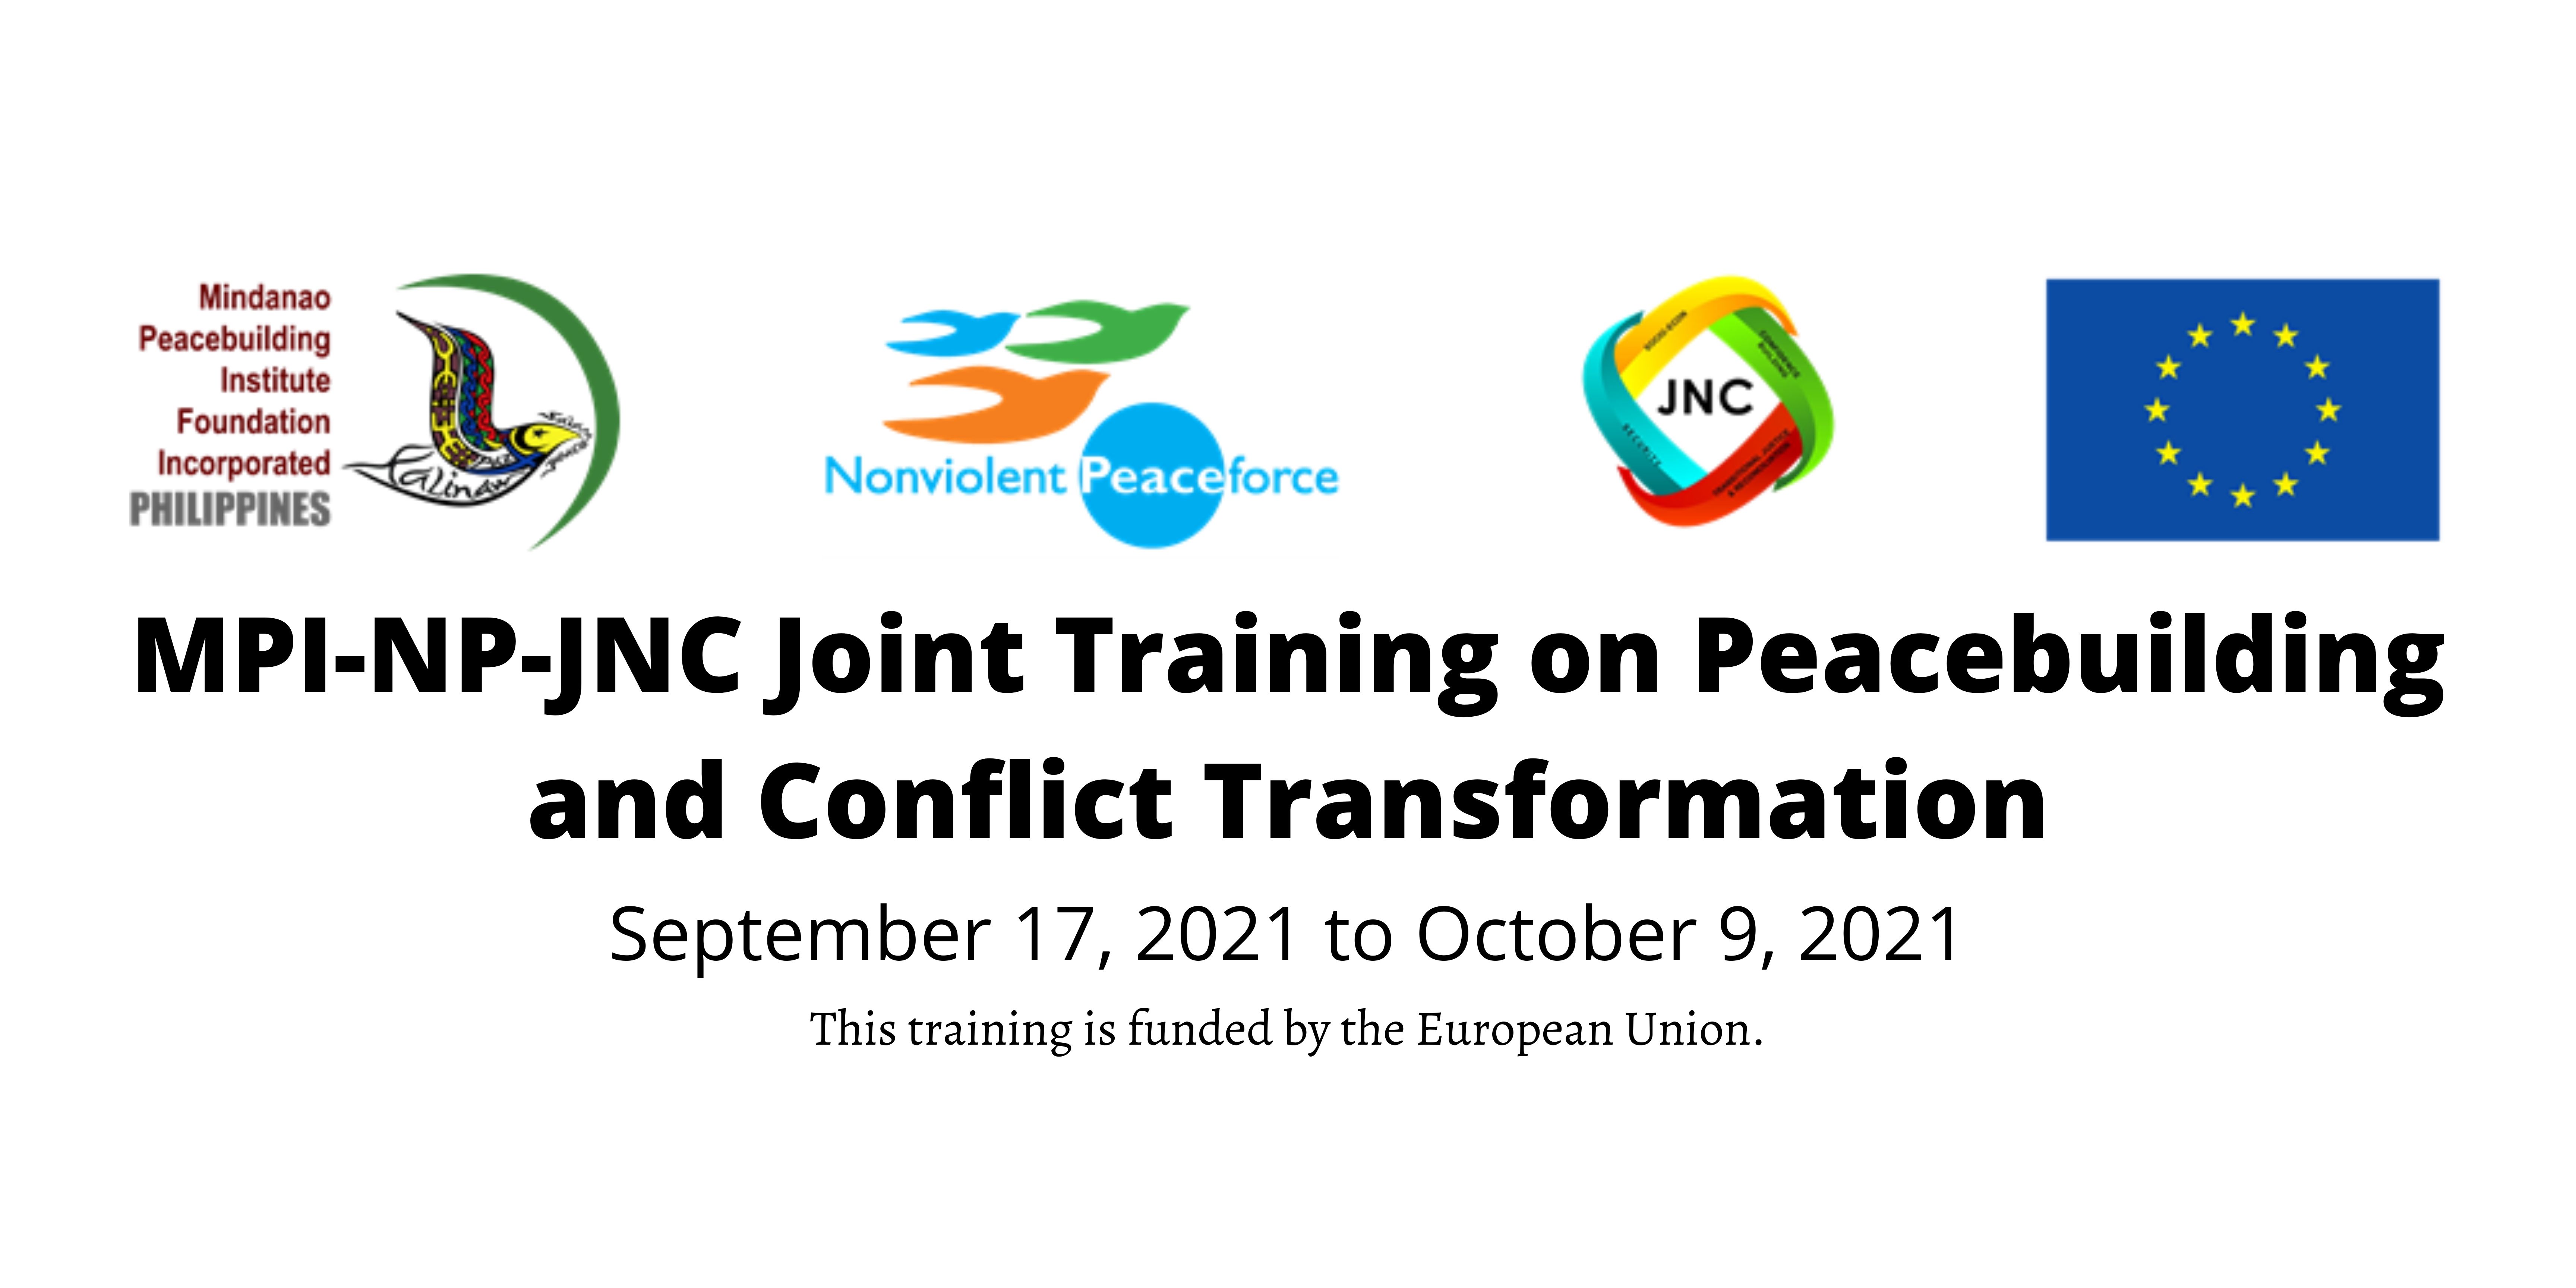 Group of logos for the Mindanao Peacebuilding Institute Foundation, Incorporated, Nonviolent Peaceforce. the Joint Normalization Committee, and the European Union